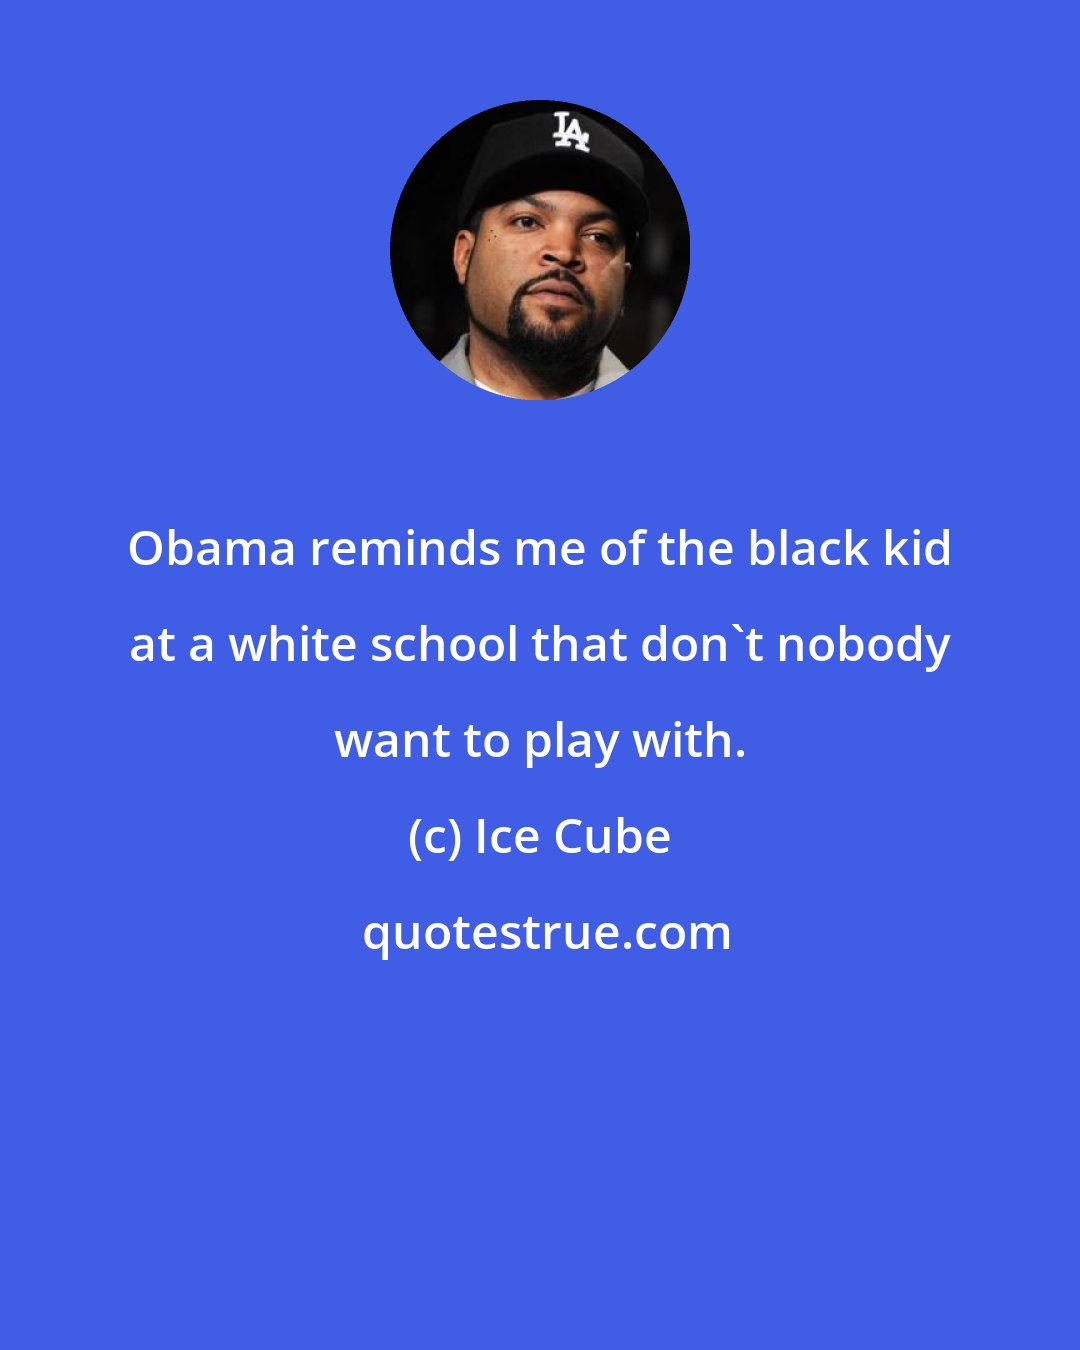 Ice Cube: Obama reminds me of the black kid at a white school that don't nobody want to play with.